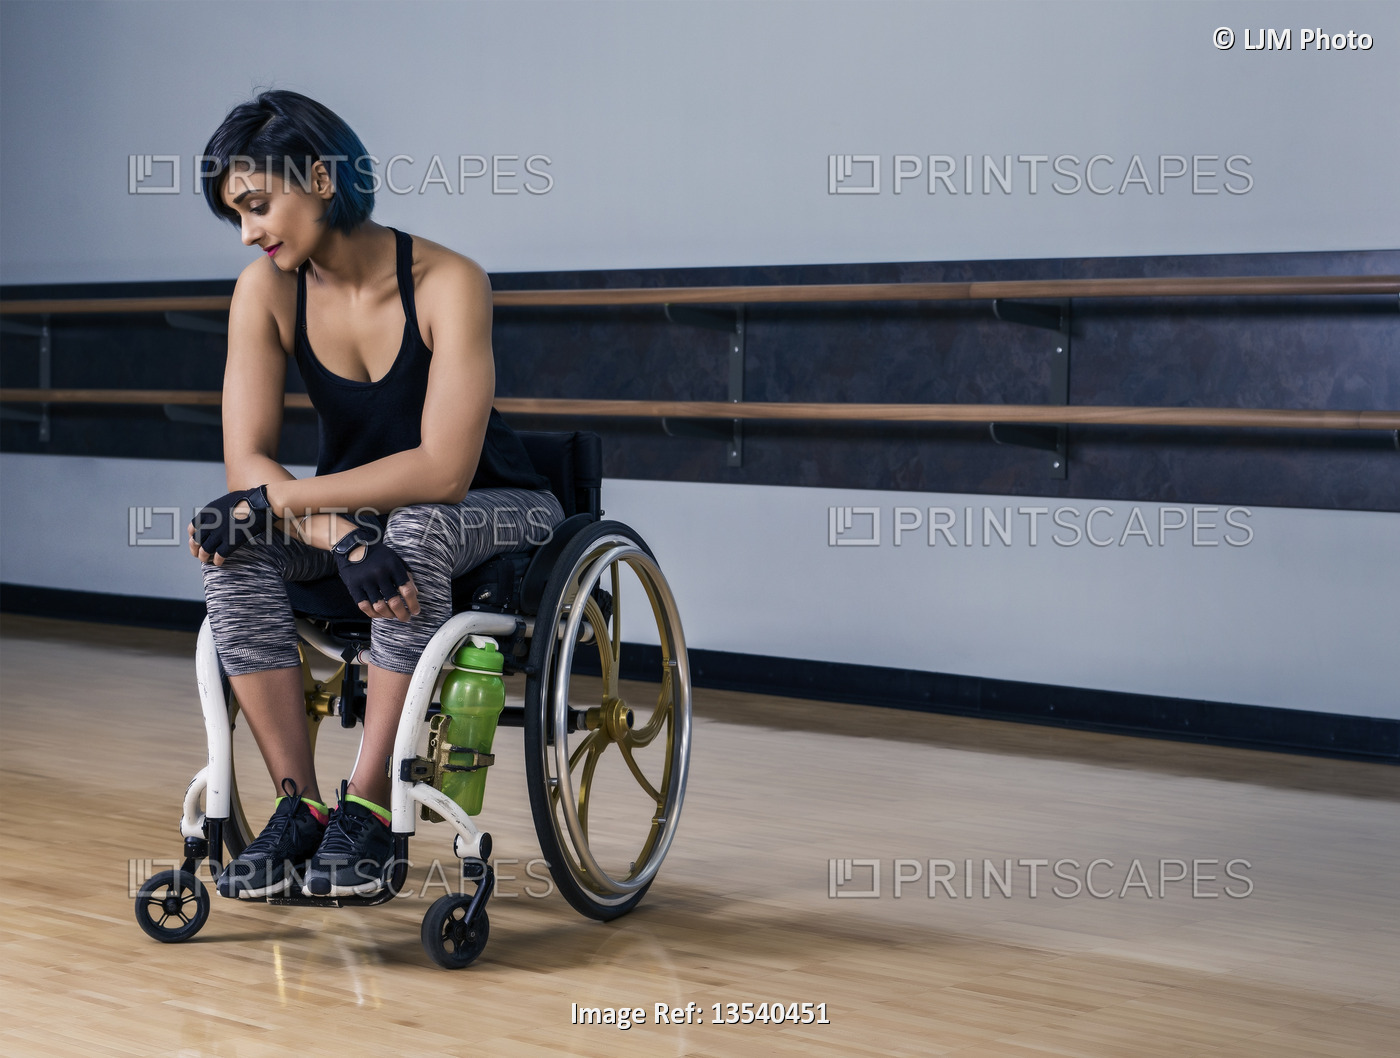 A paraplegic woman looking discouraged while taking a break from working out in ...